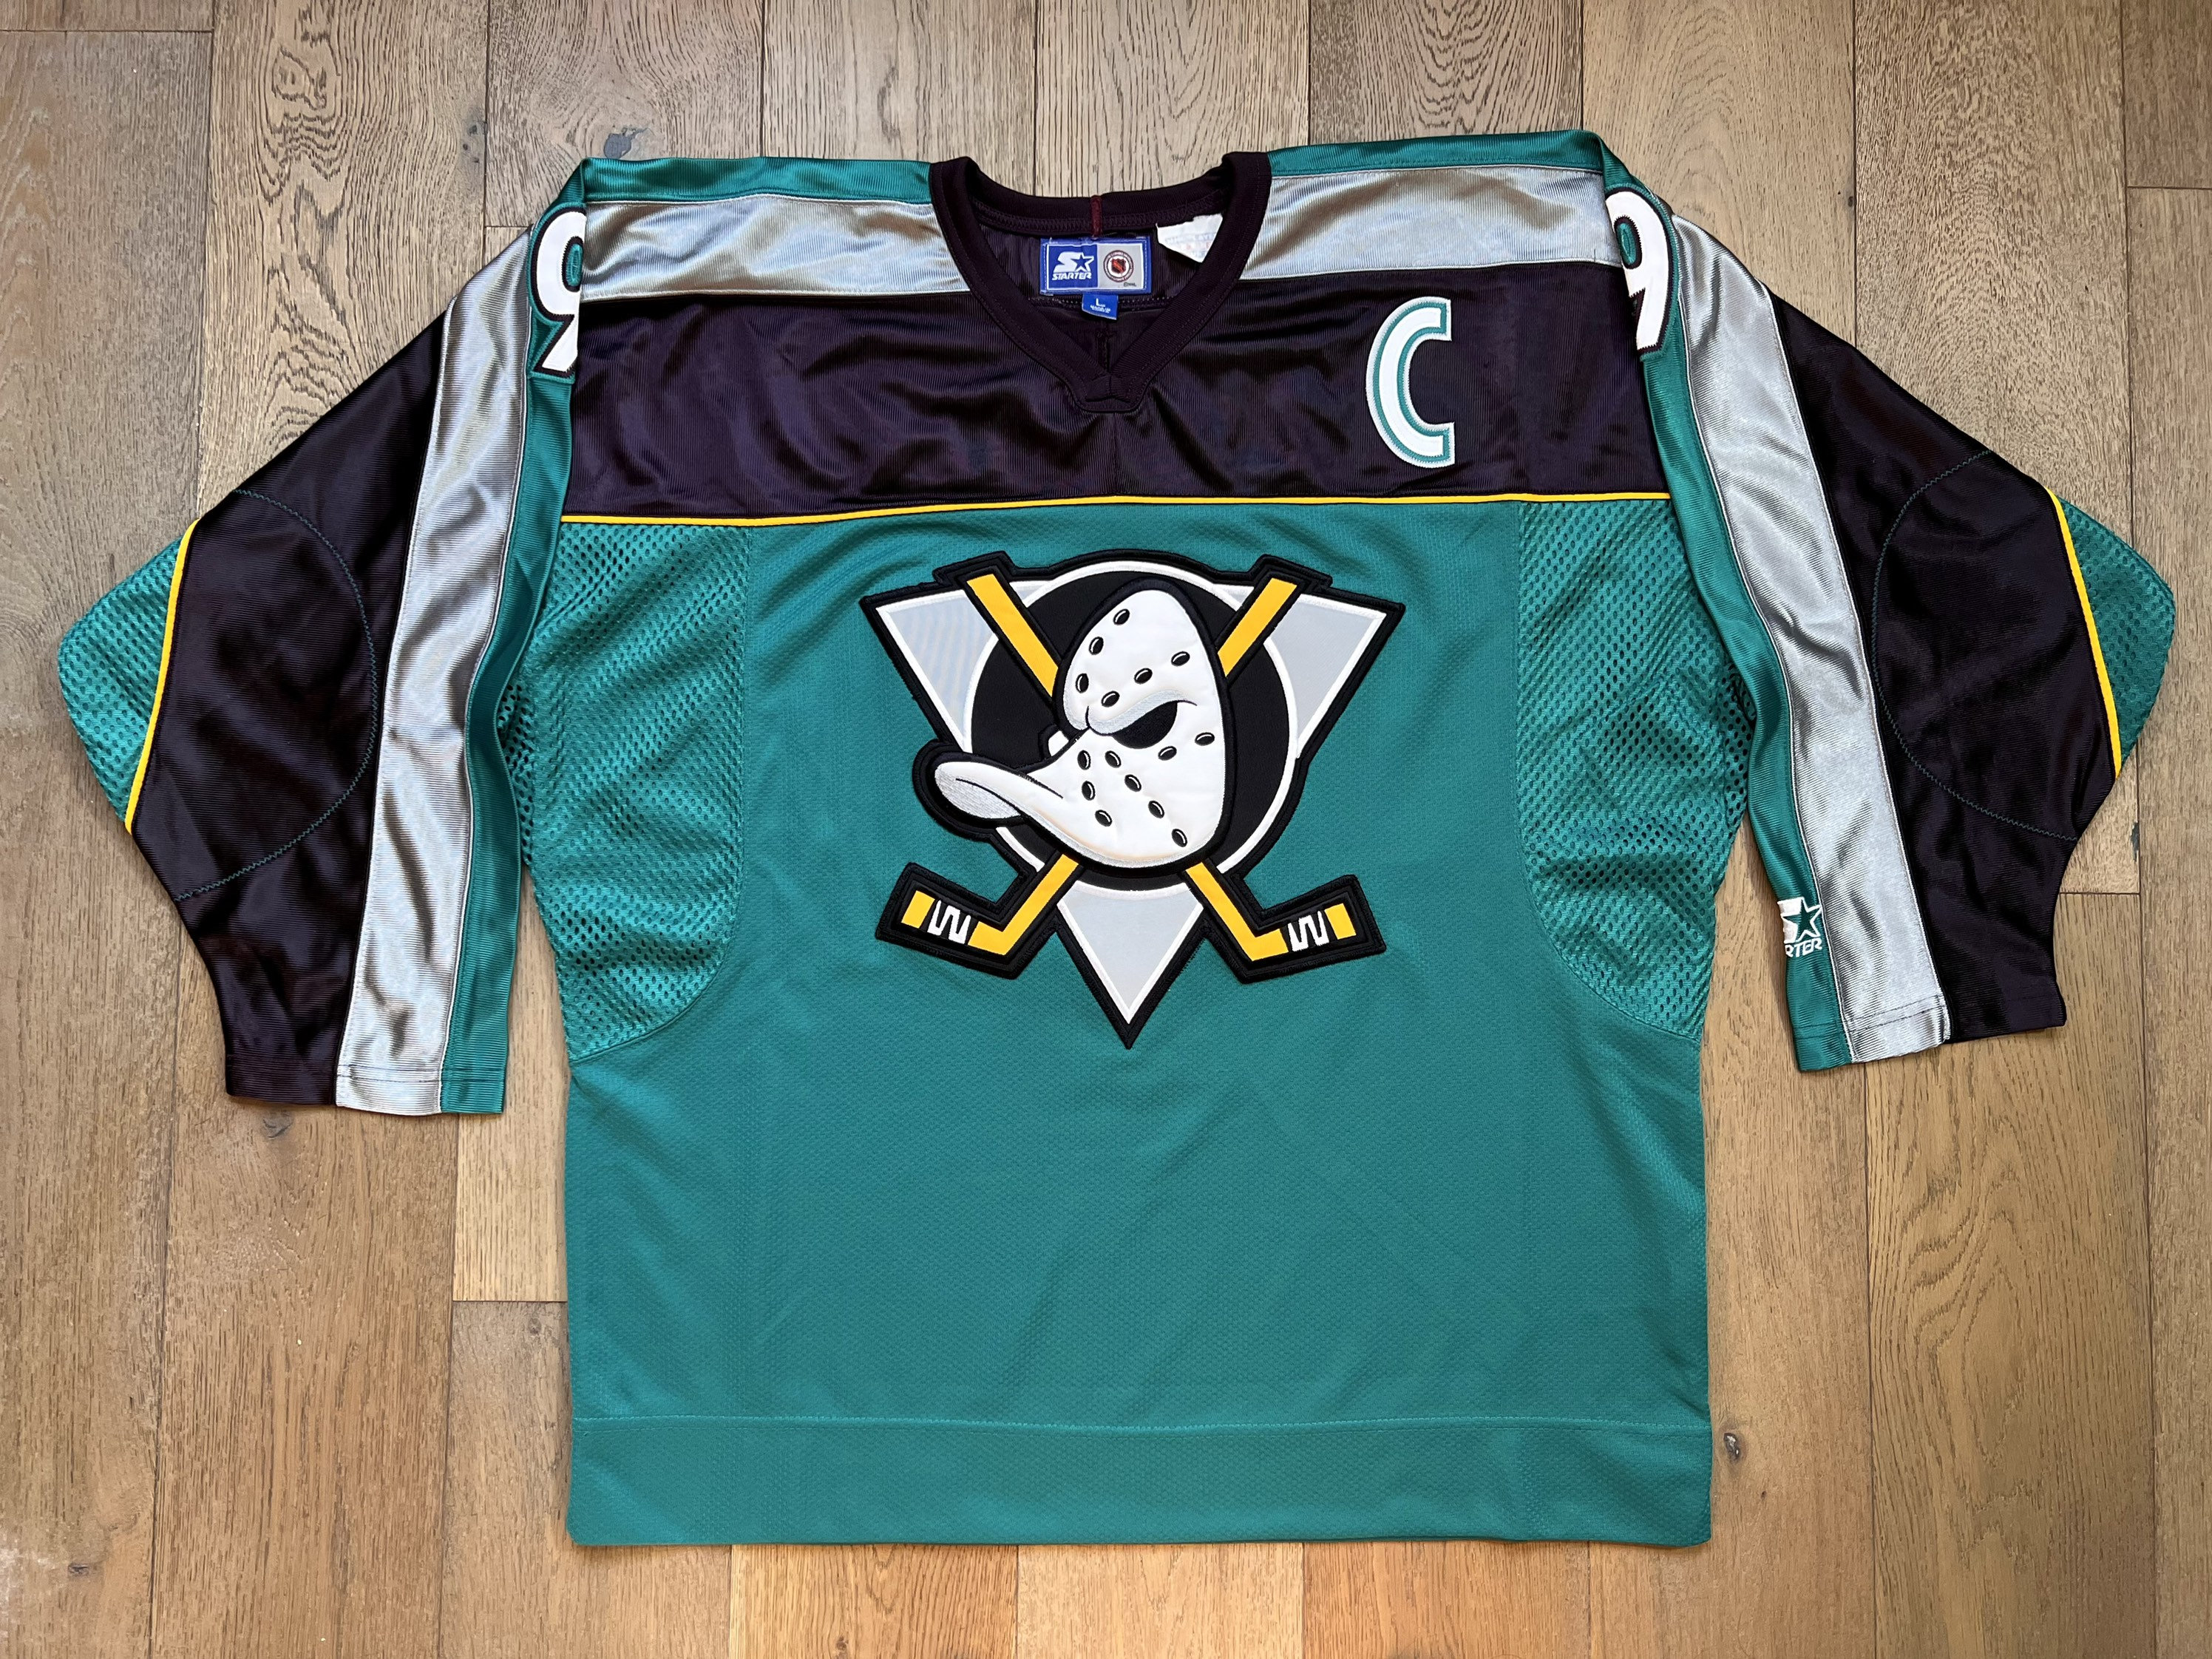 vintage ANAHEIM MiGHTY DUCKS SHIRT, LARGE, JERSEY-STYLE, MAJESTIC NHL 90s